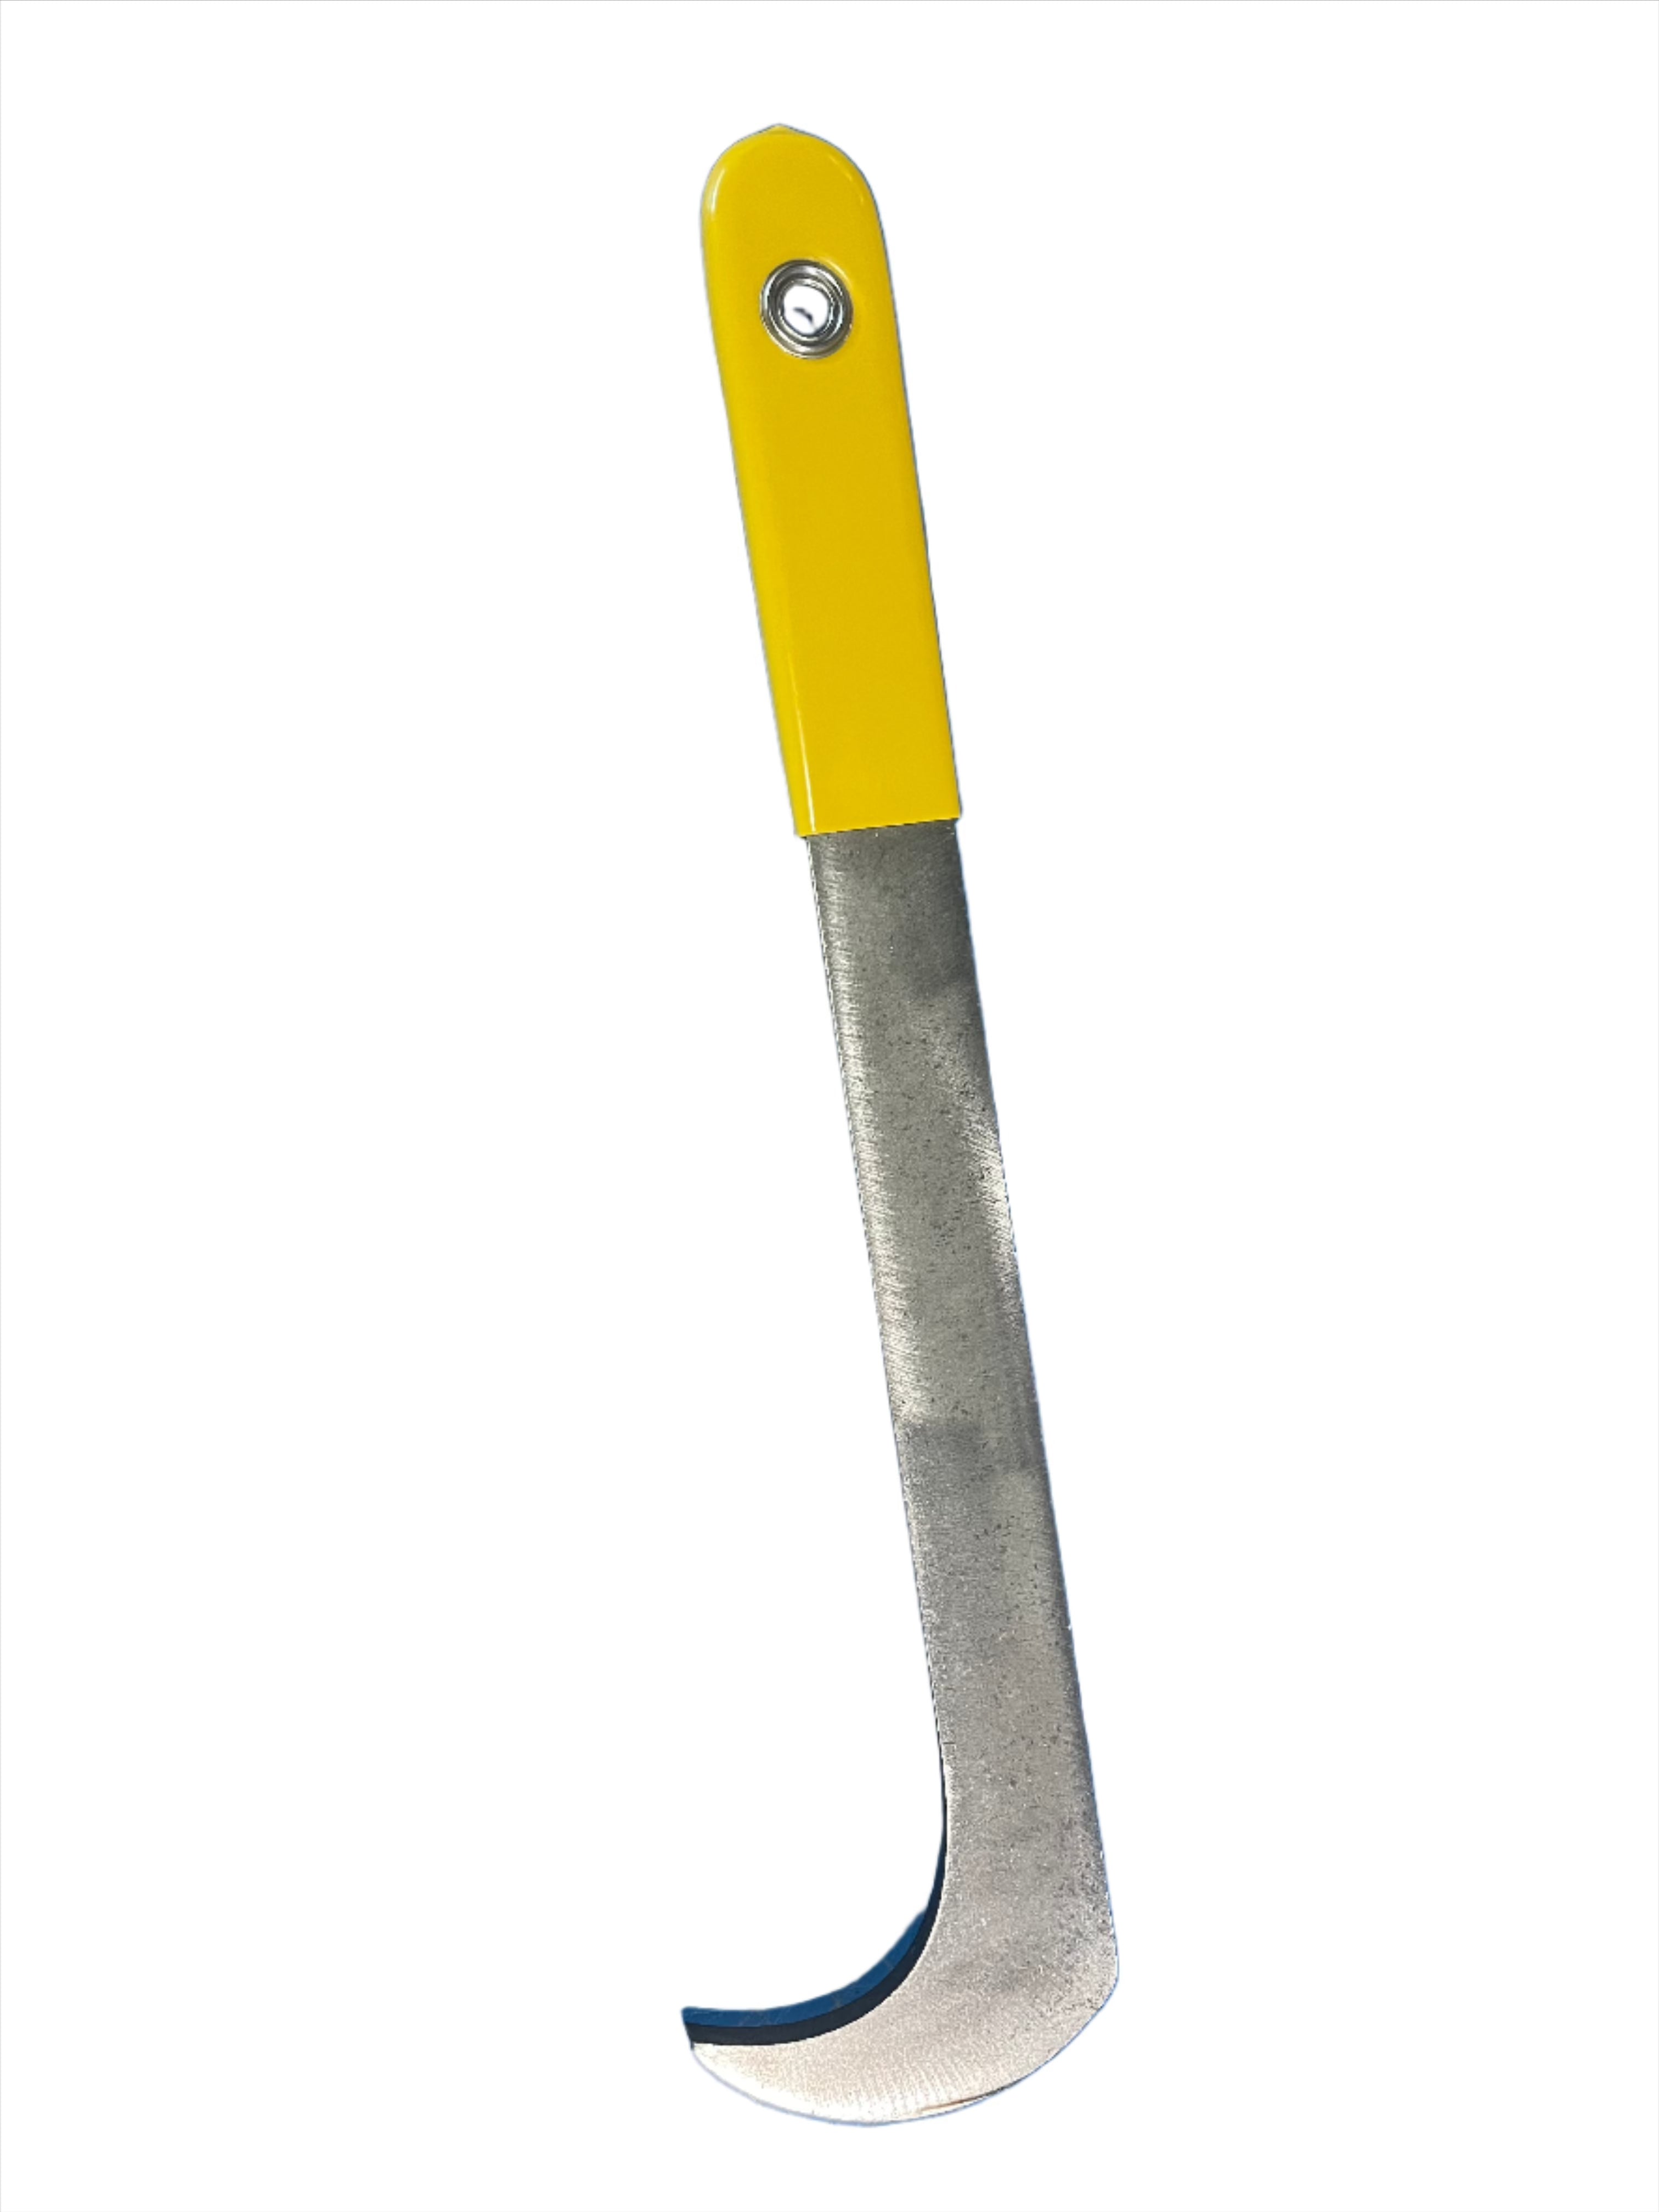 Curved End Crevice Pick with Comfort Handle